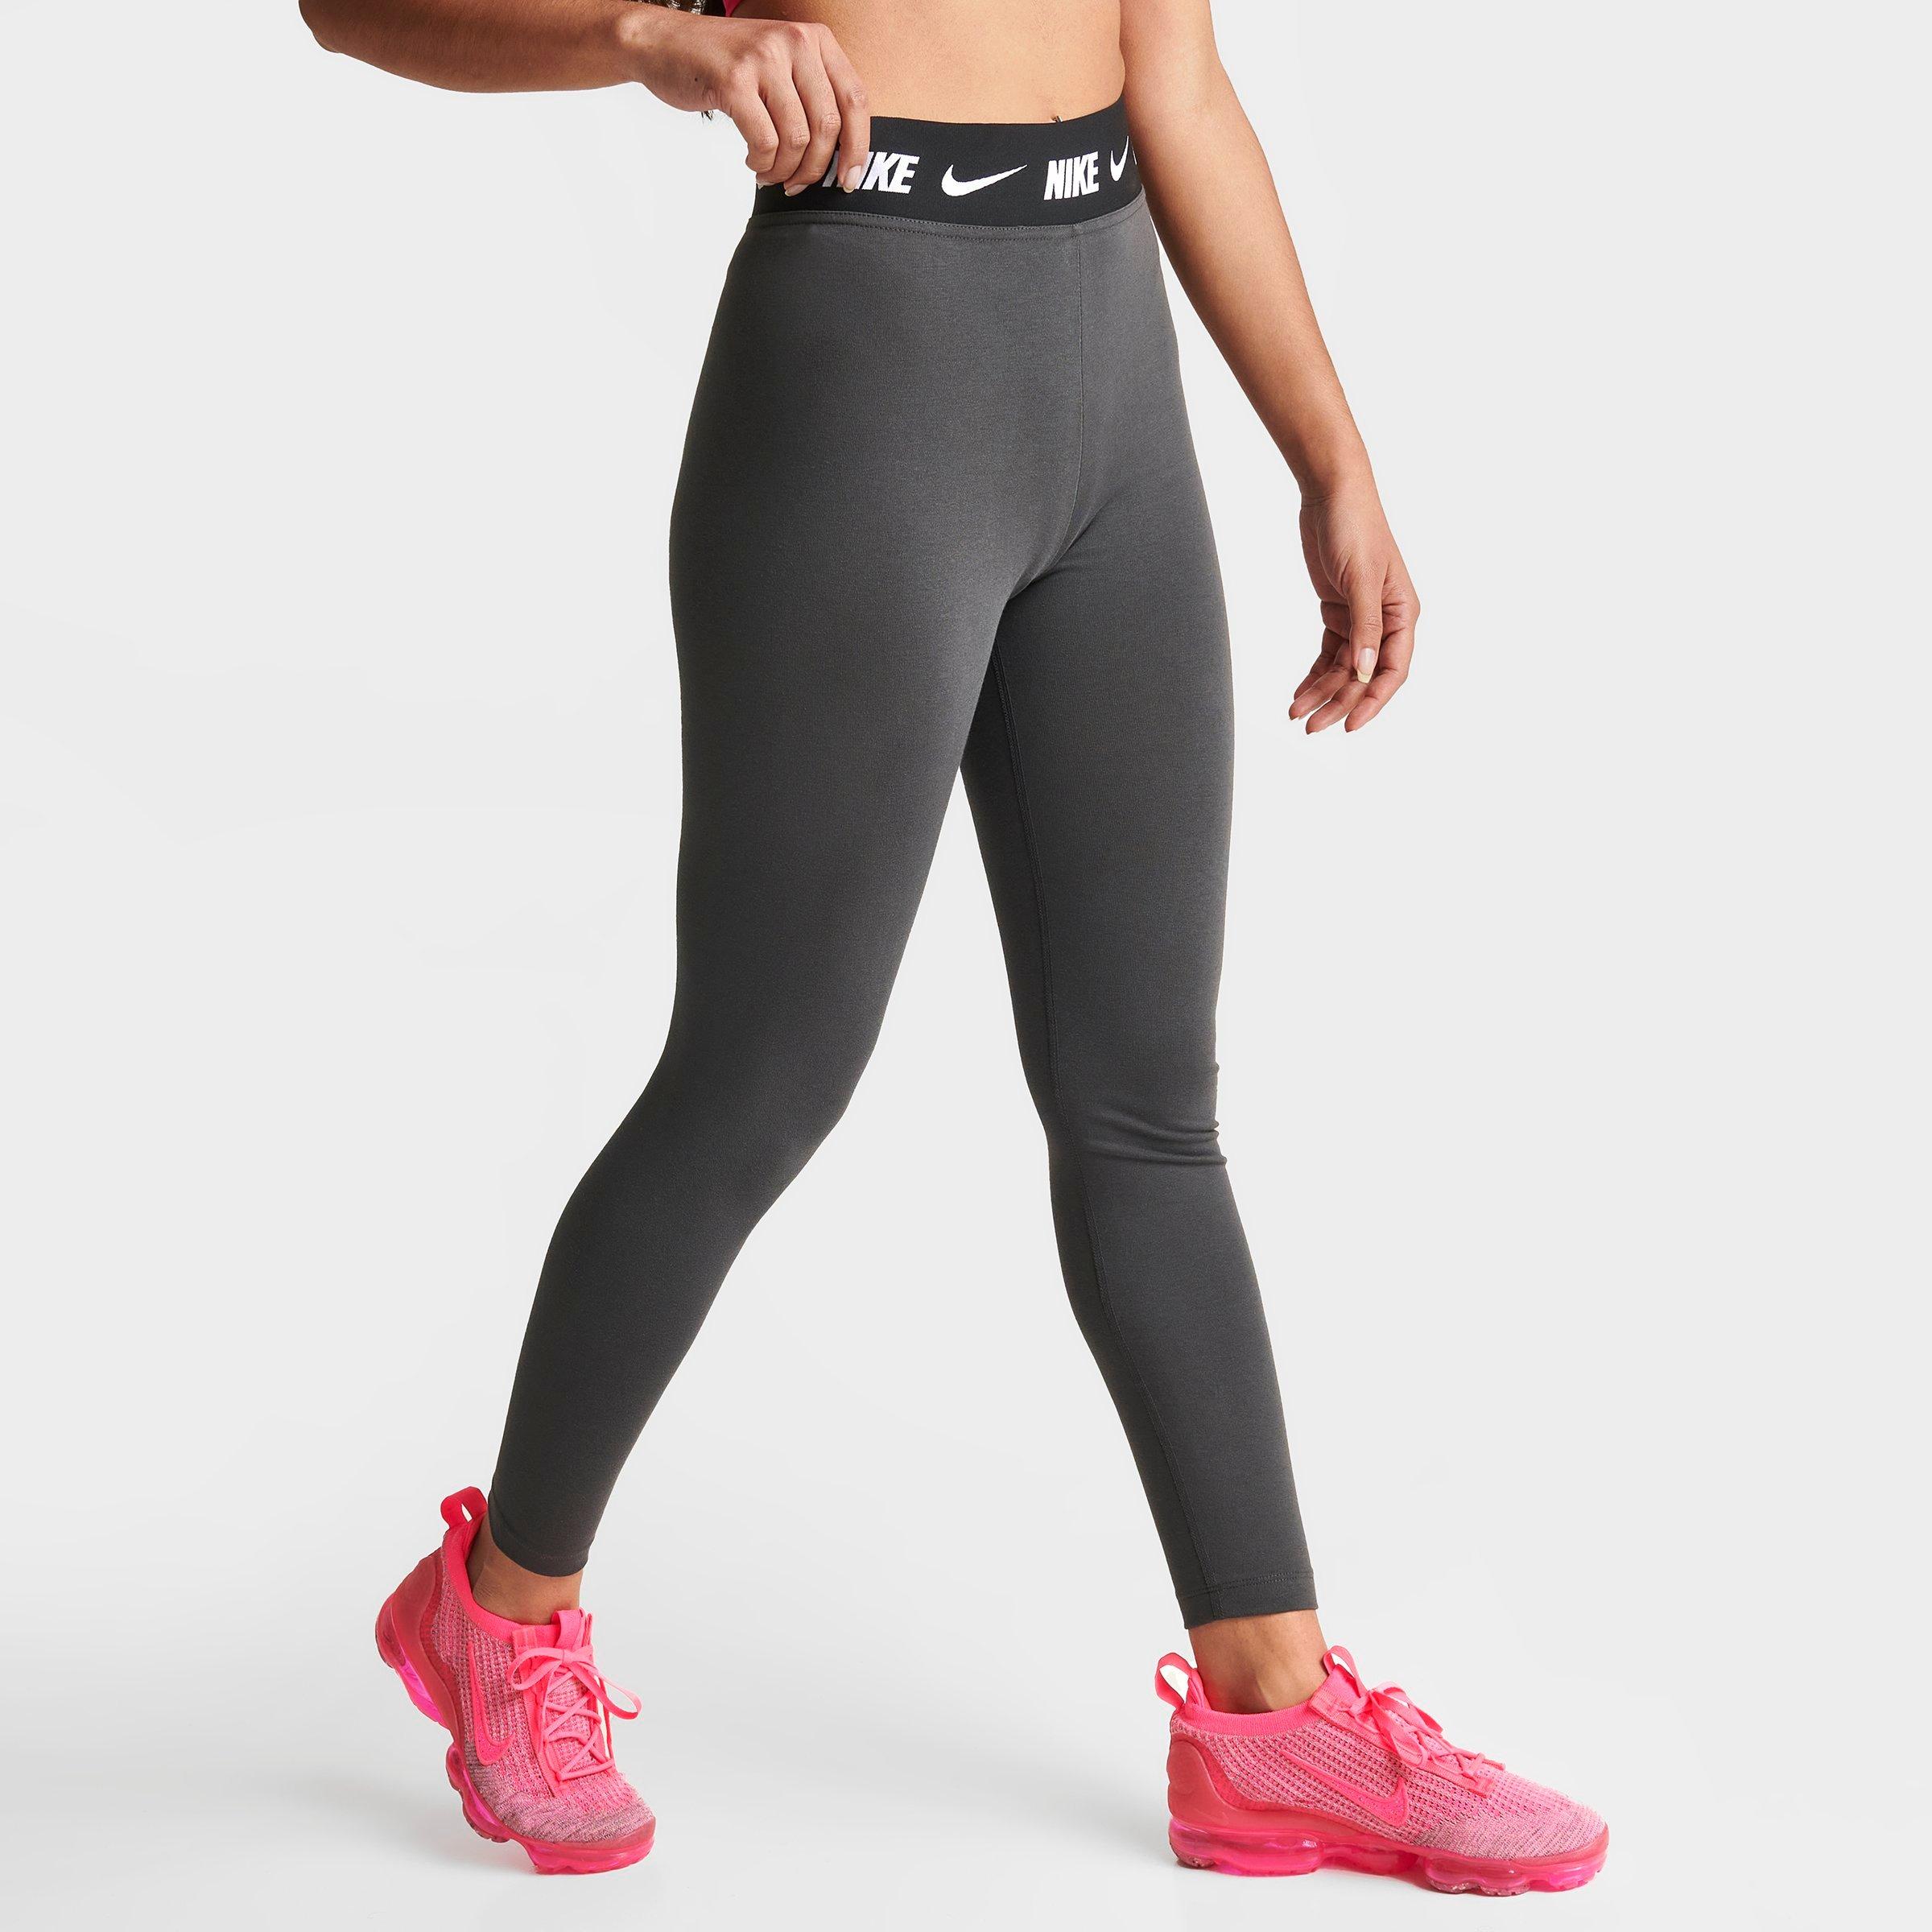 Shop JD Sports Women's High Waisted Gym Leggings up to 80% Off